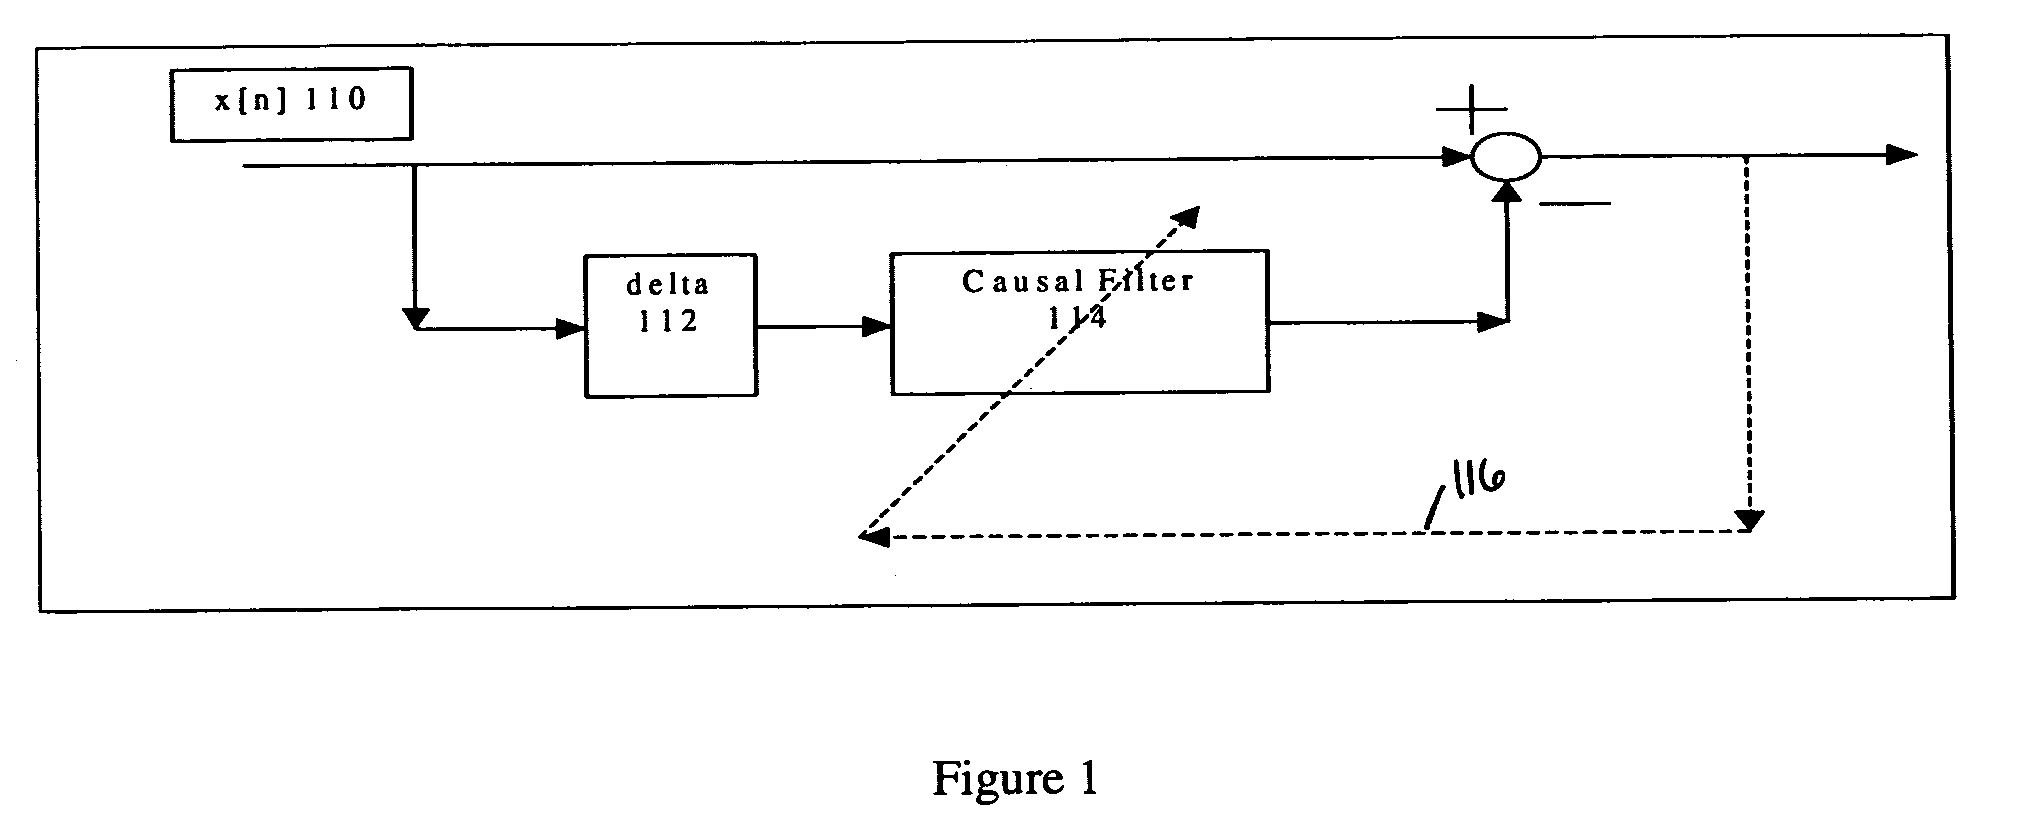 Method and system for reducing interferences due to handshake tones